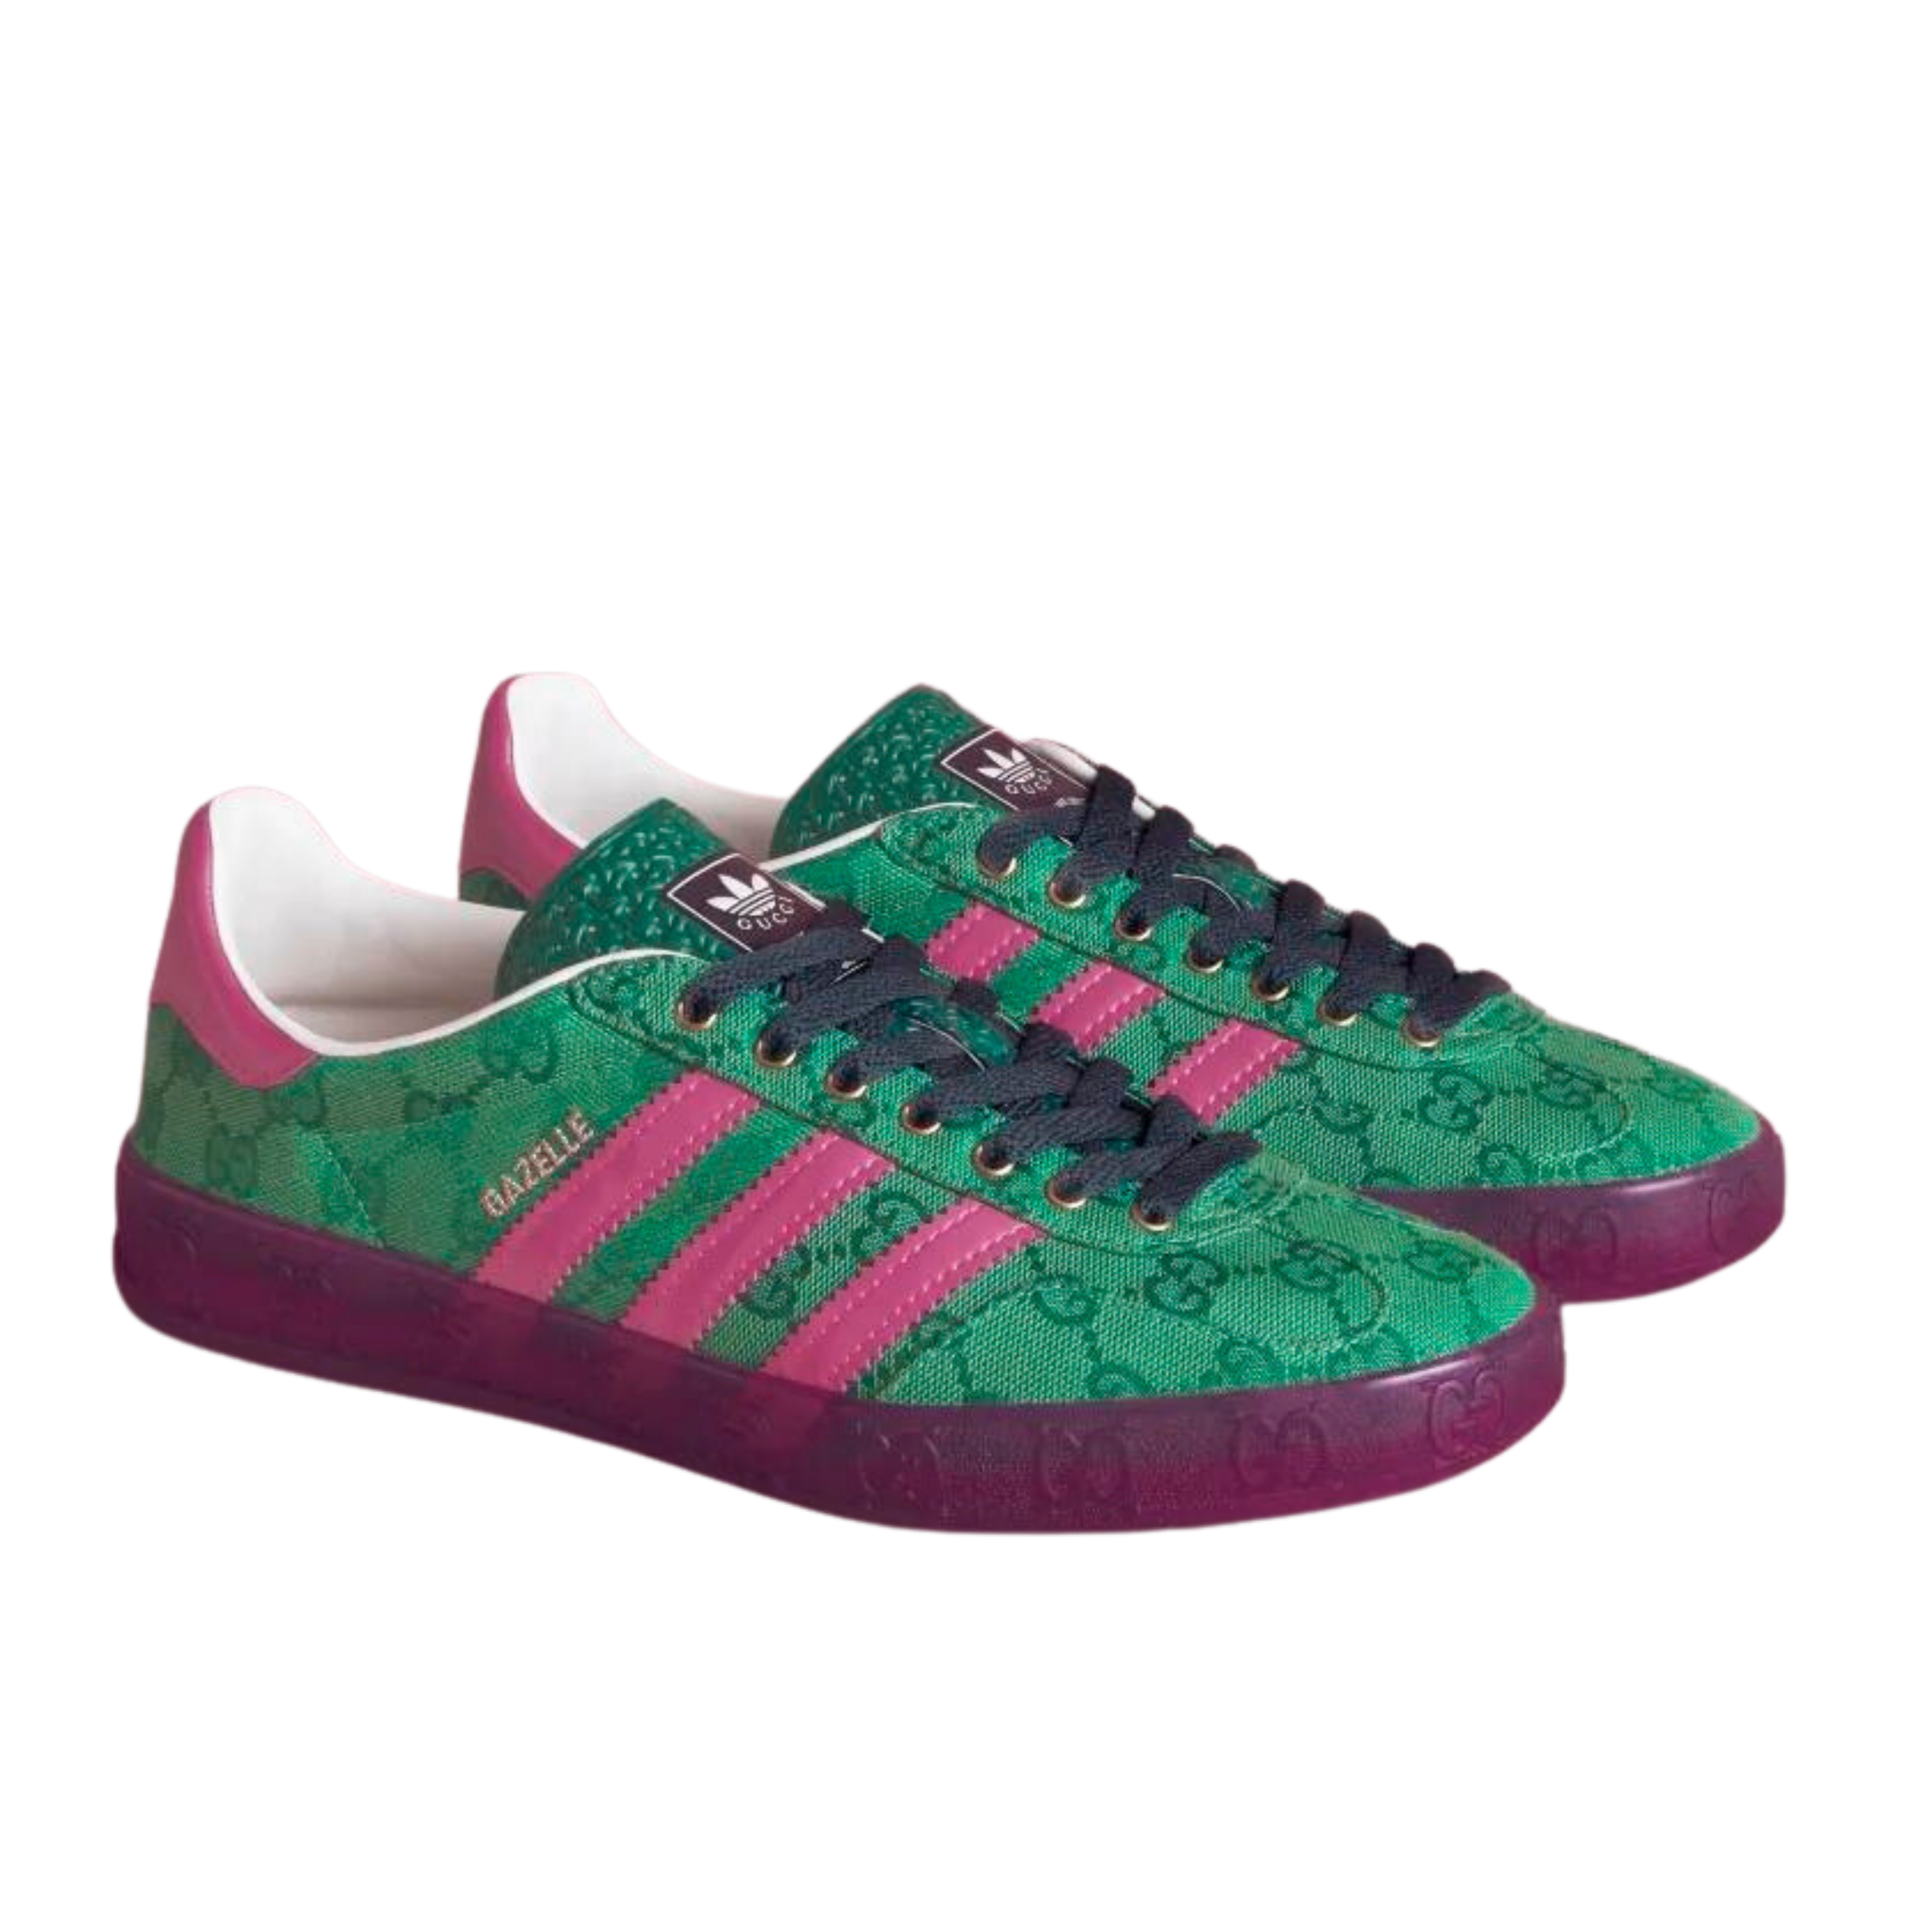 Adidas shoes for women | Buy adidas sneaker shoes from merkis